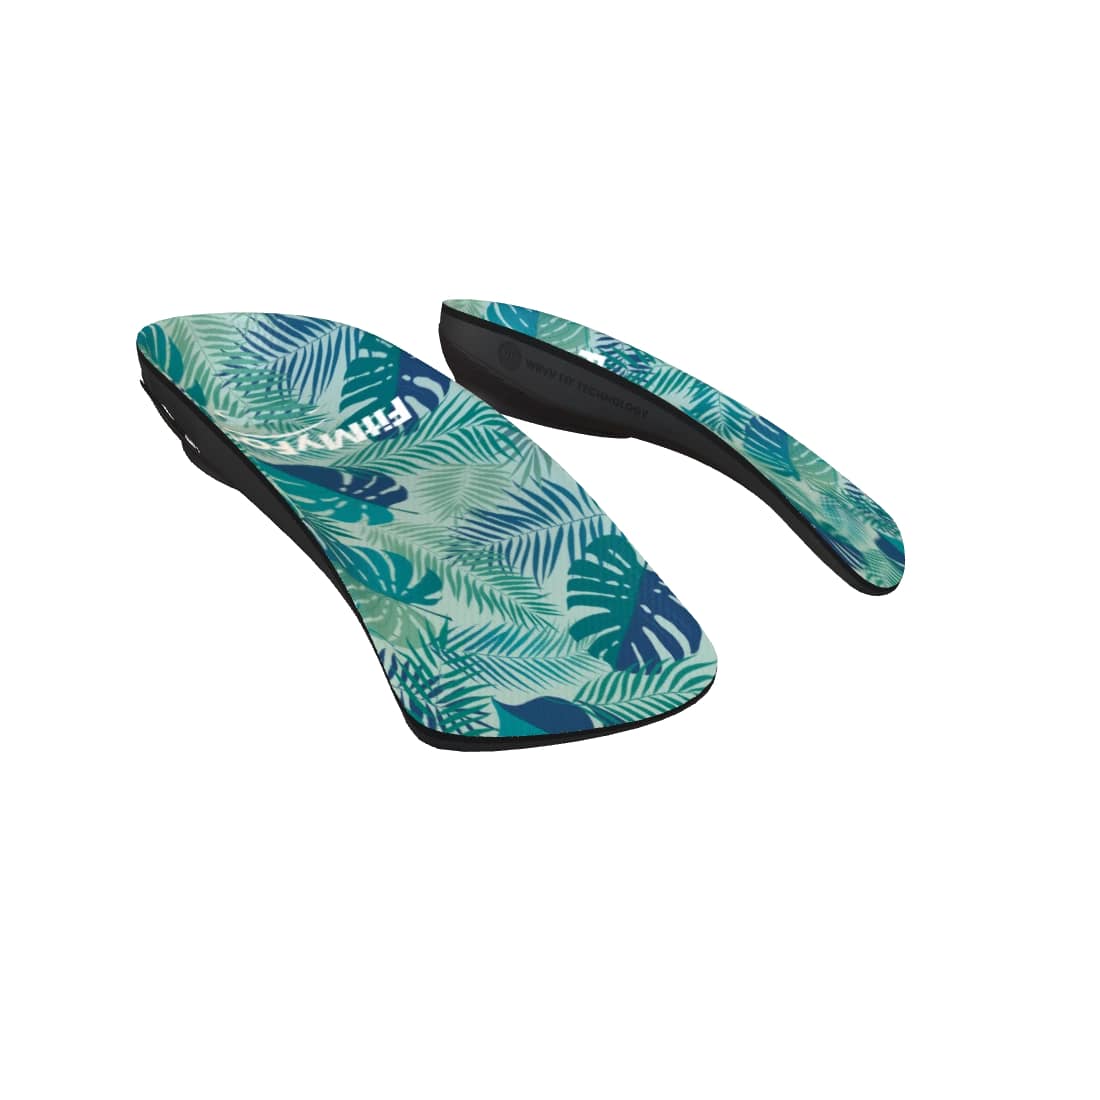 Custom Arch Support Insoles - Aloha